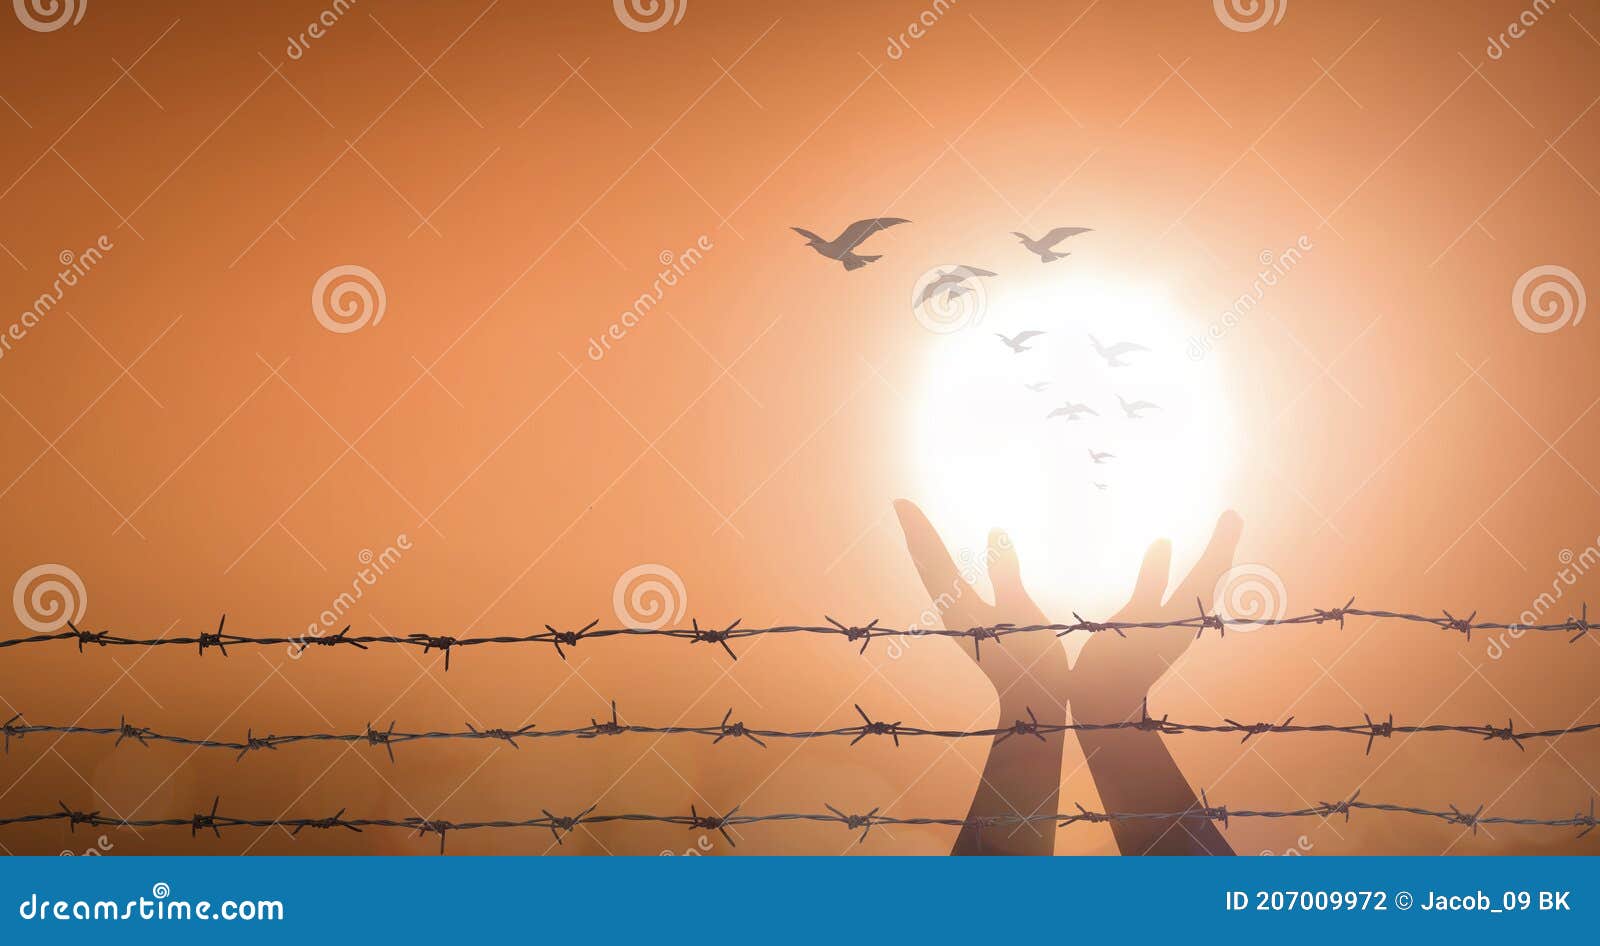 prayer praise god and birds flying with barbed wire